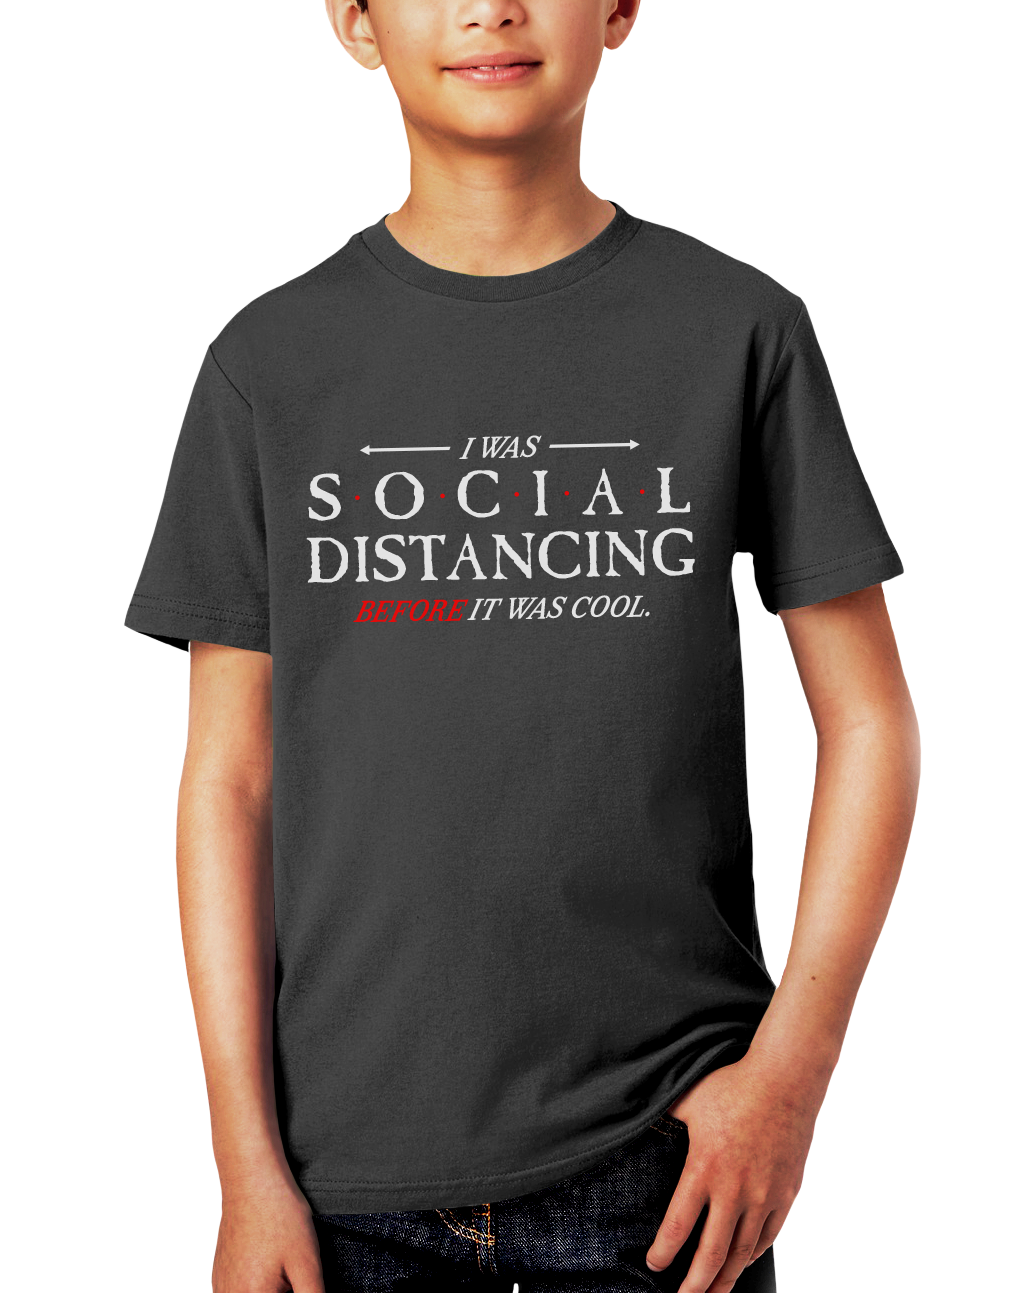 Social Distancing Before It Was Cool (BST)